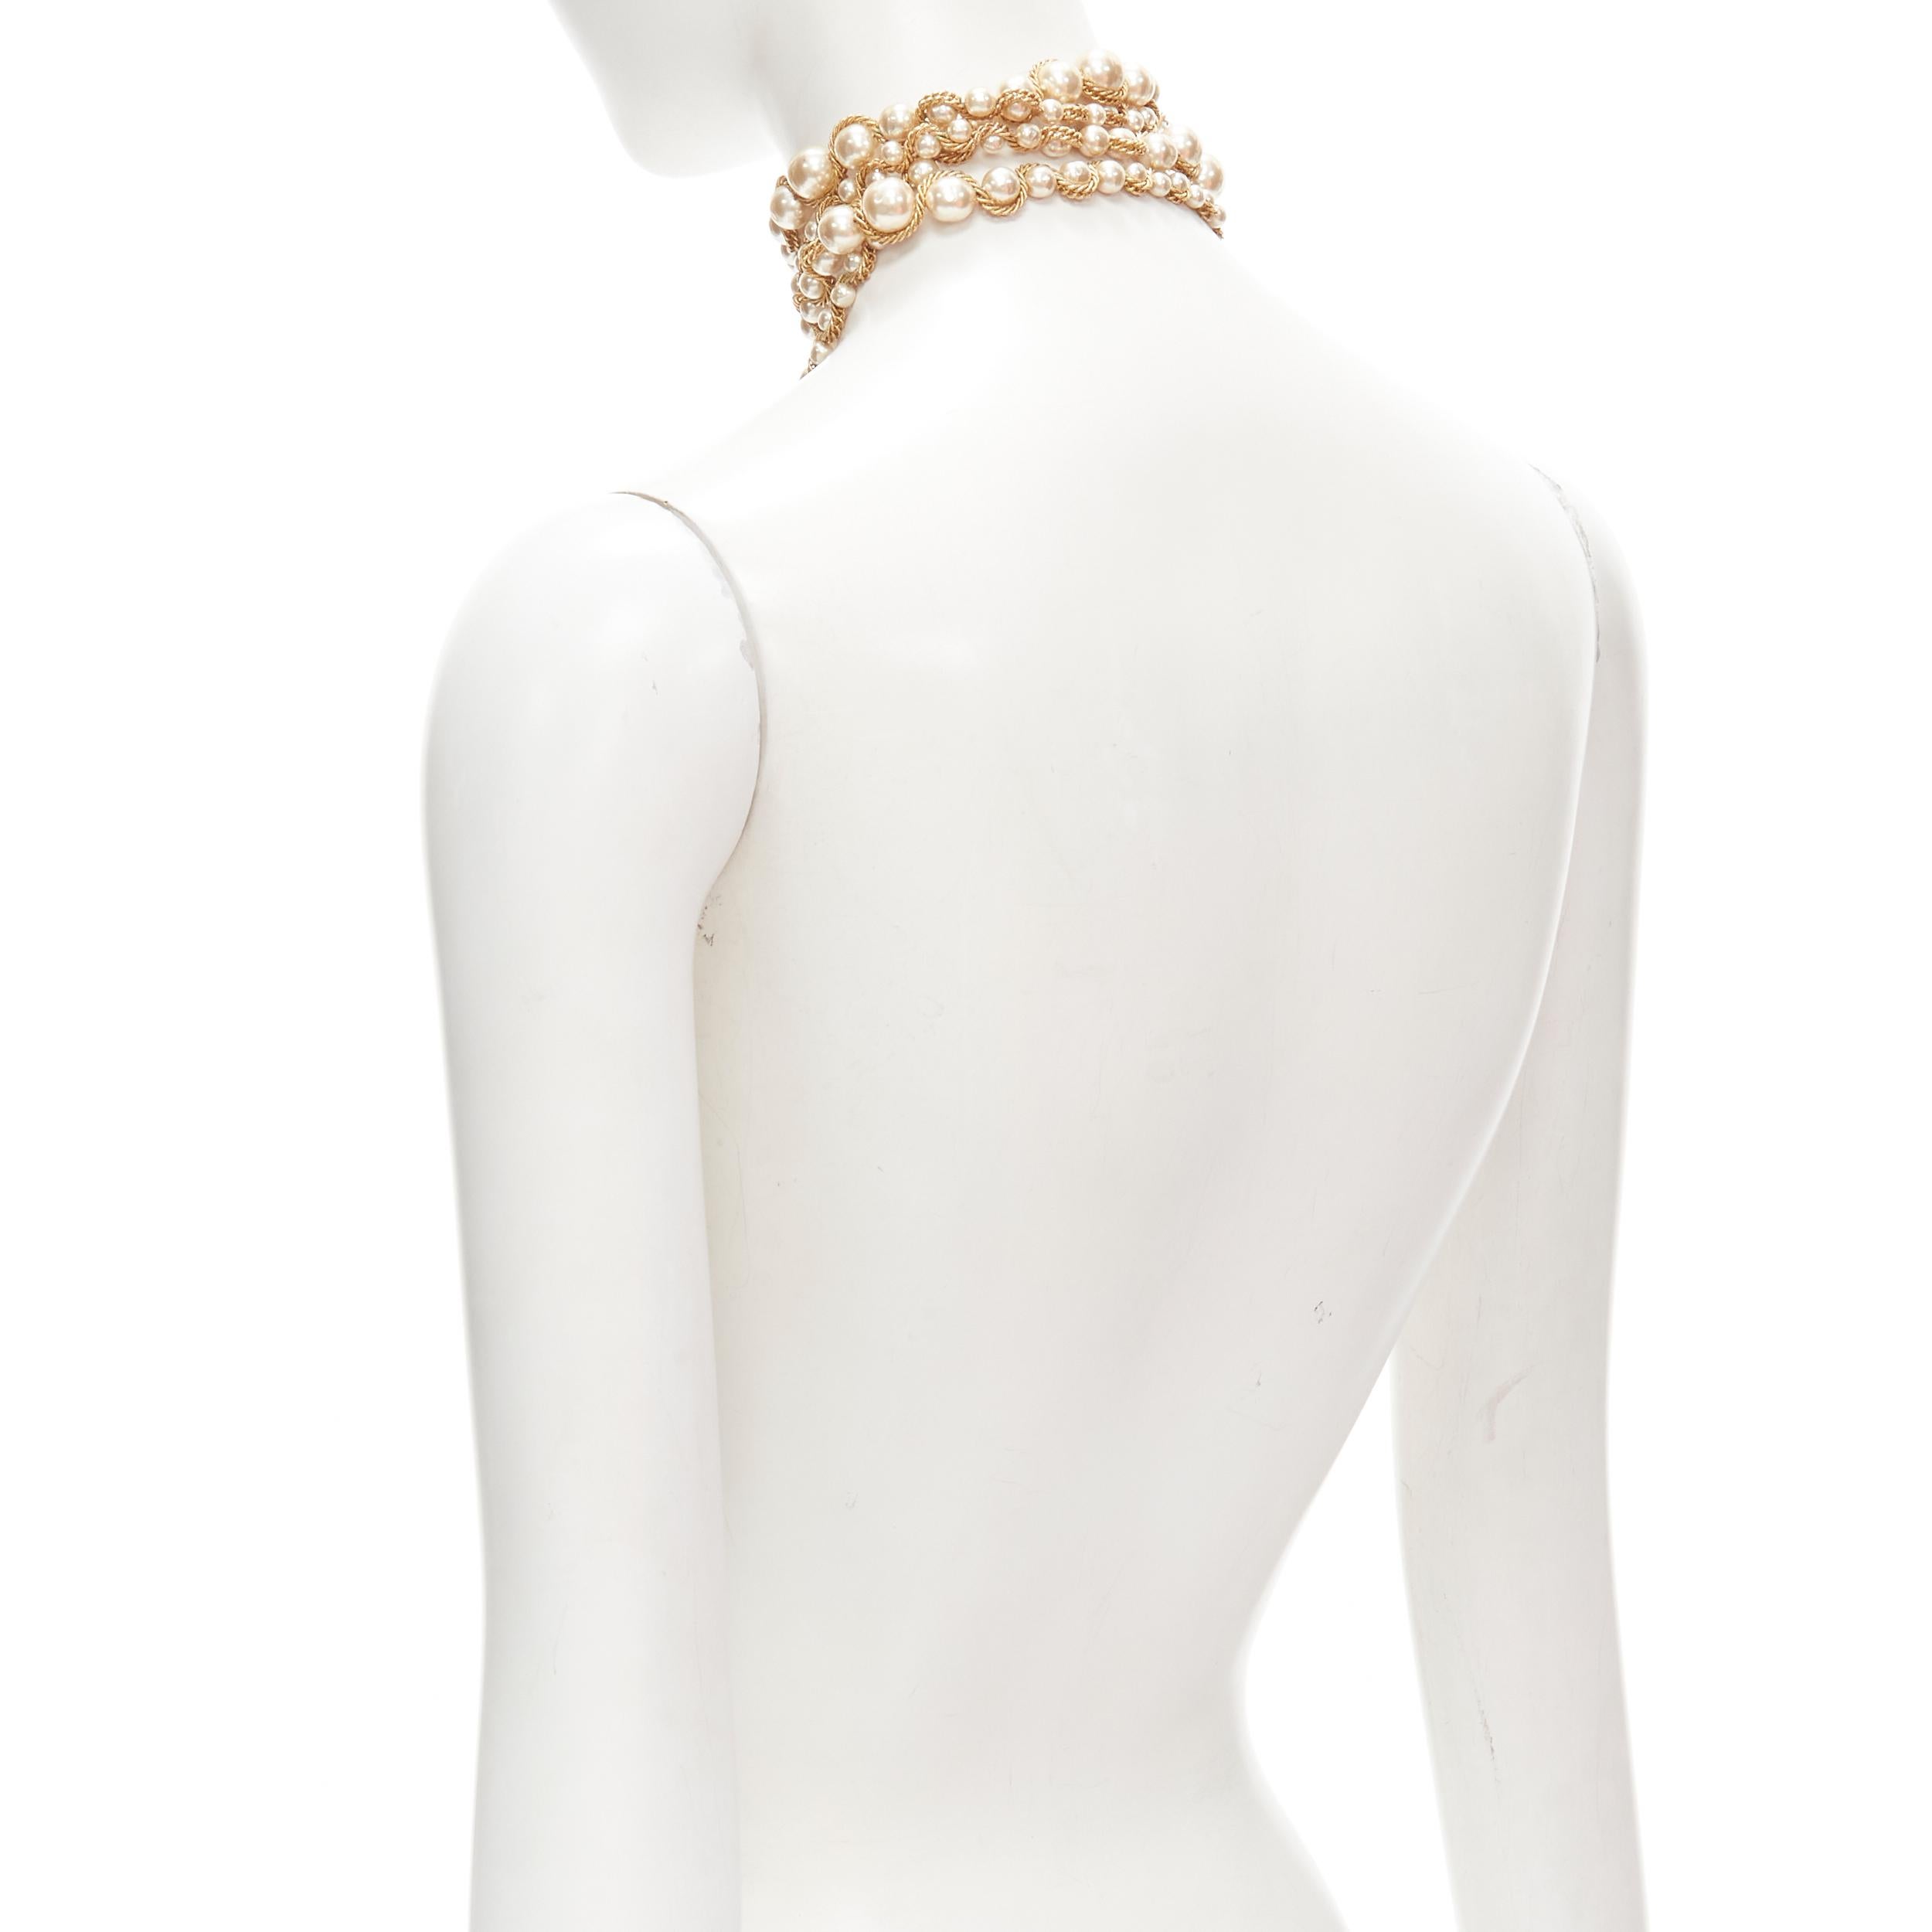 MIRIAM HASKELL faux pearl gold chain branded Sautoir necklace 2